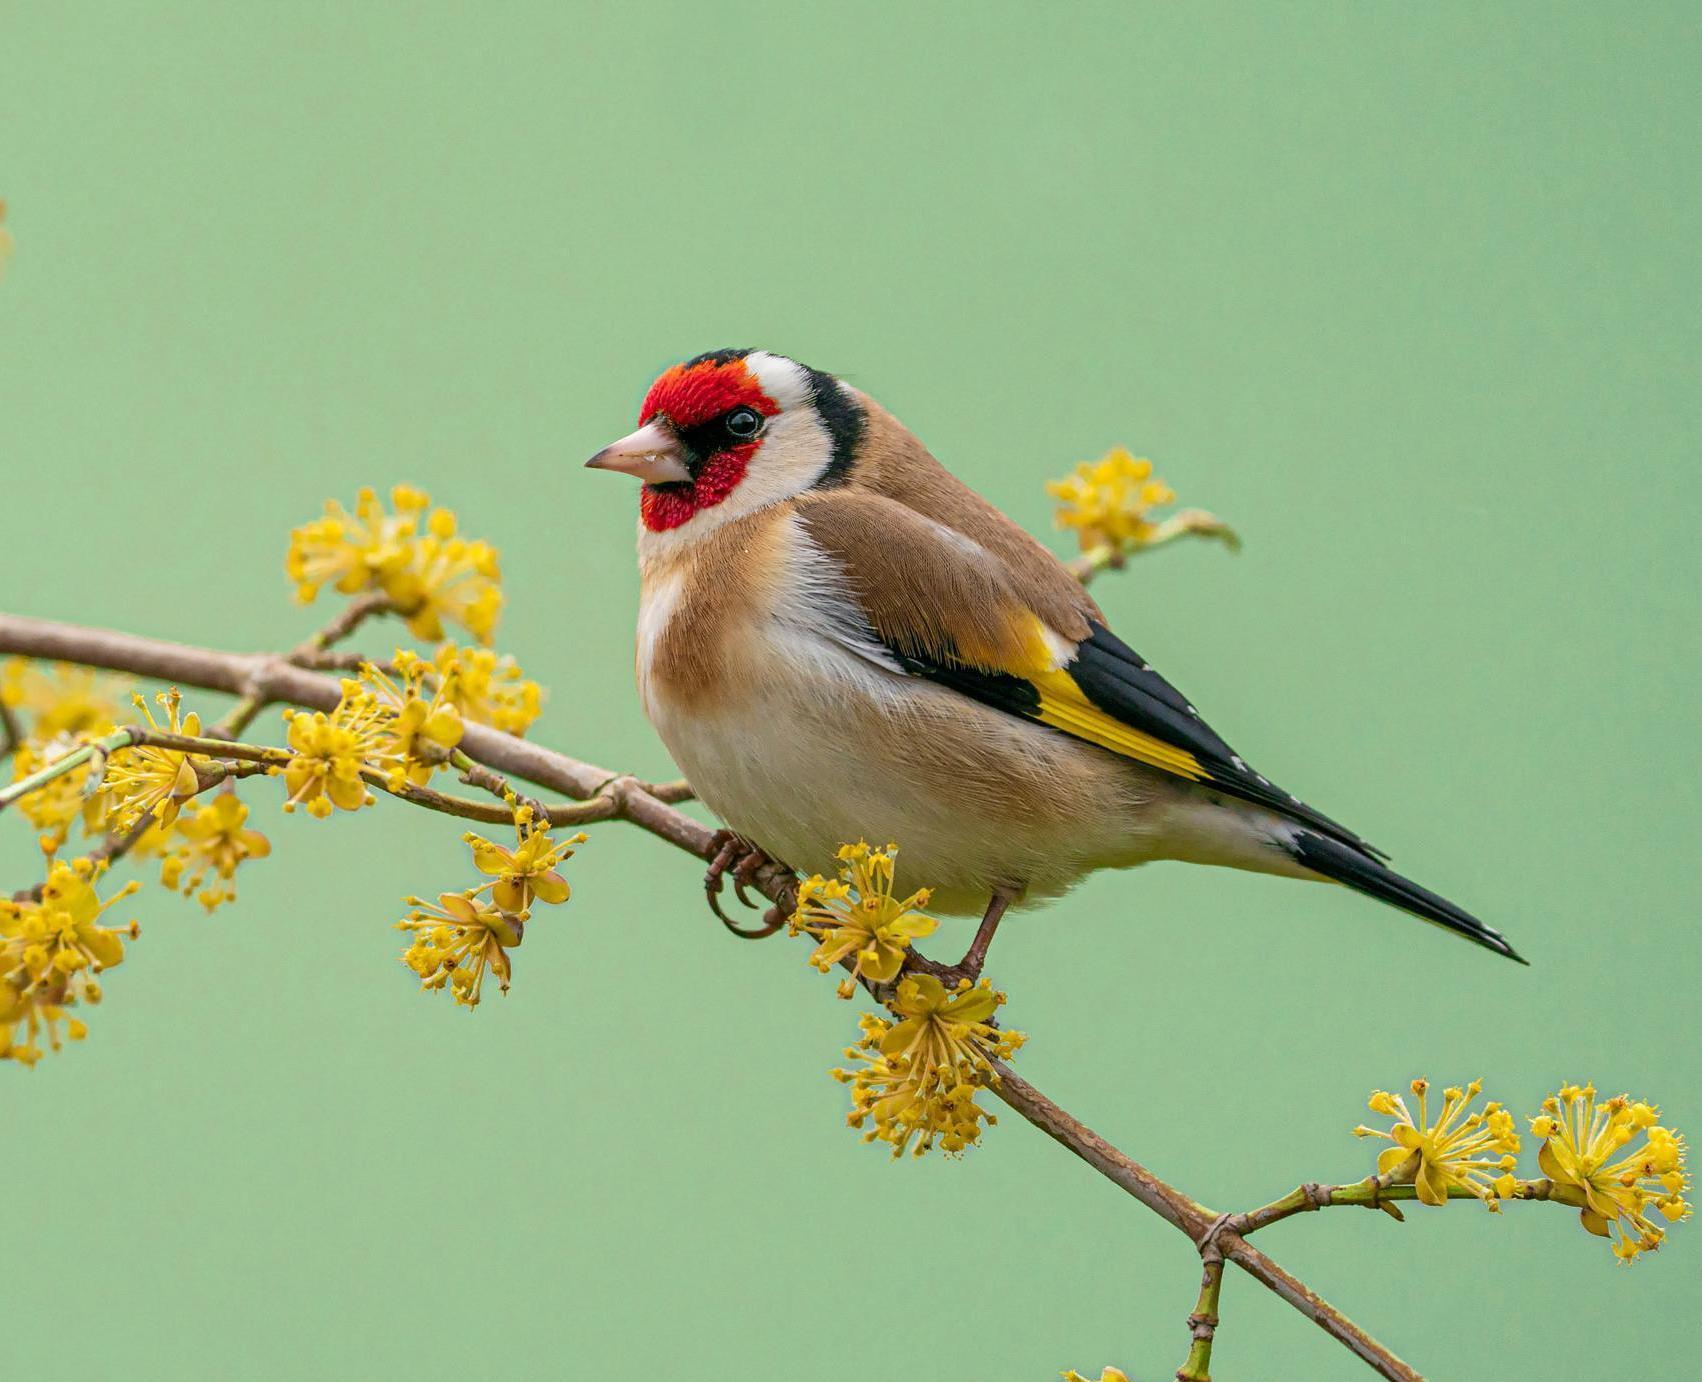 A lone Goldfinch perched on a branch surrounded by yellow leaves.